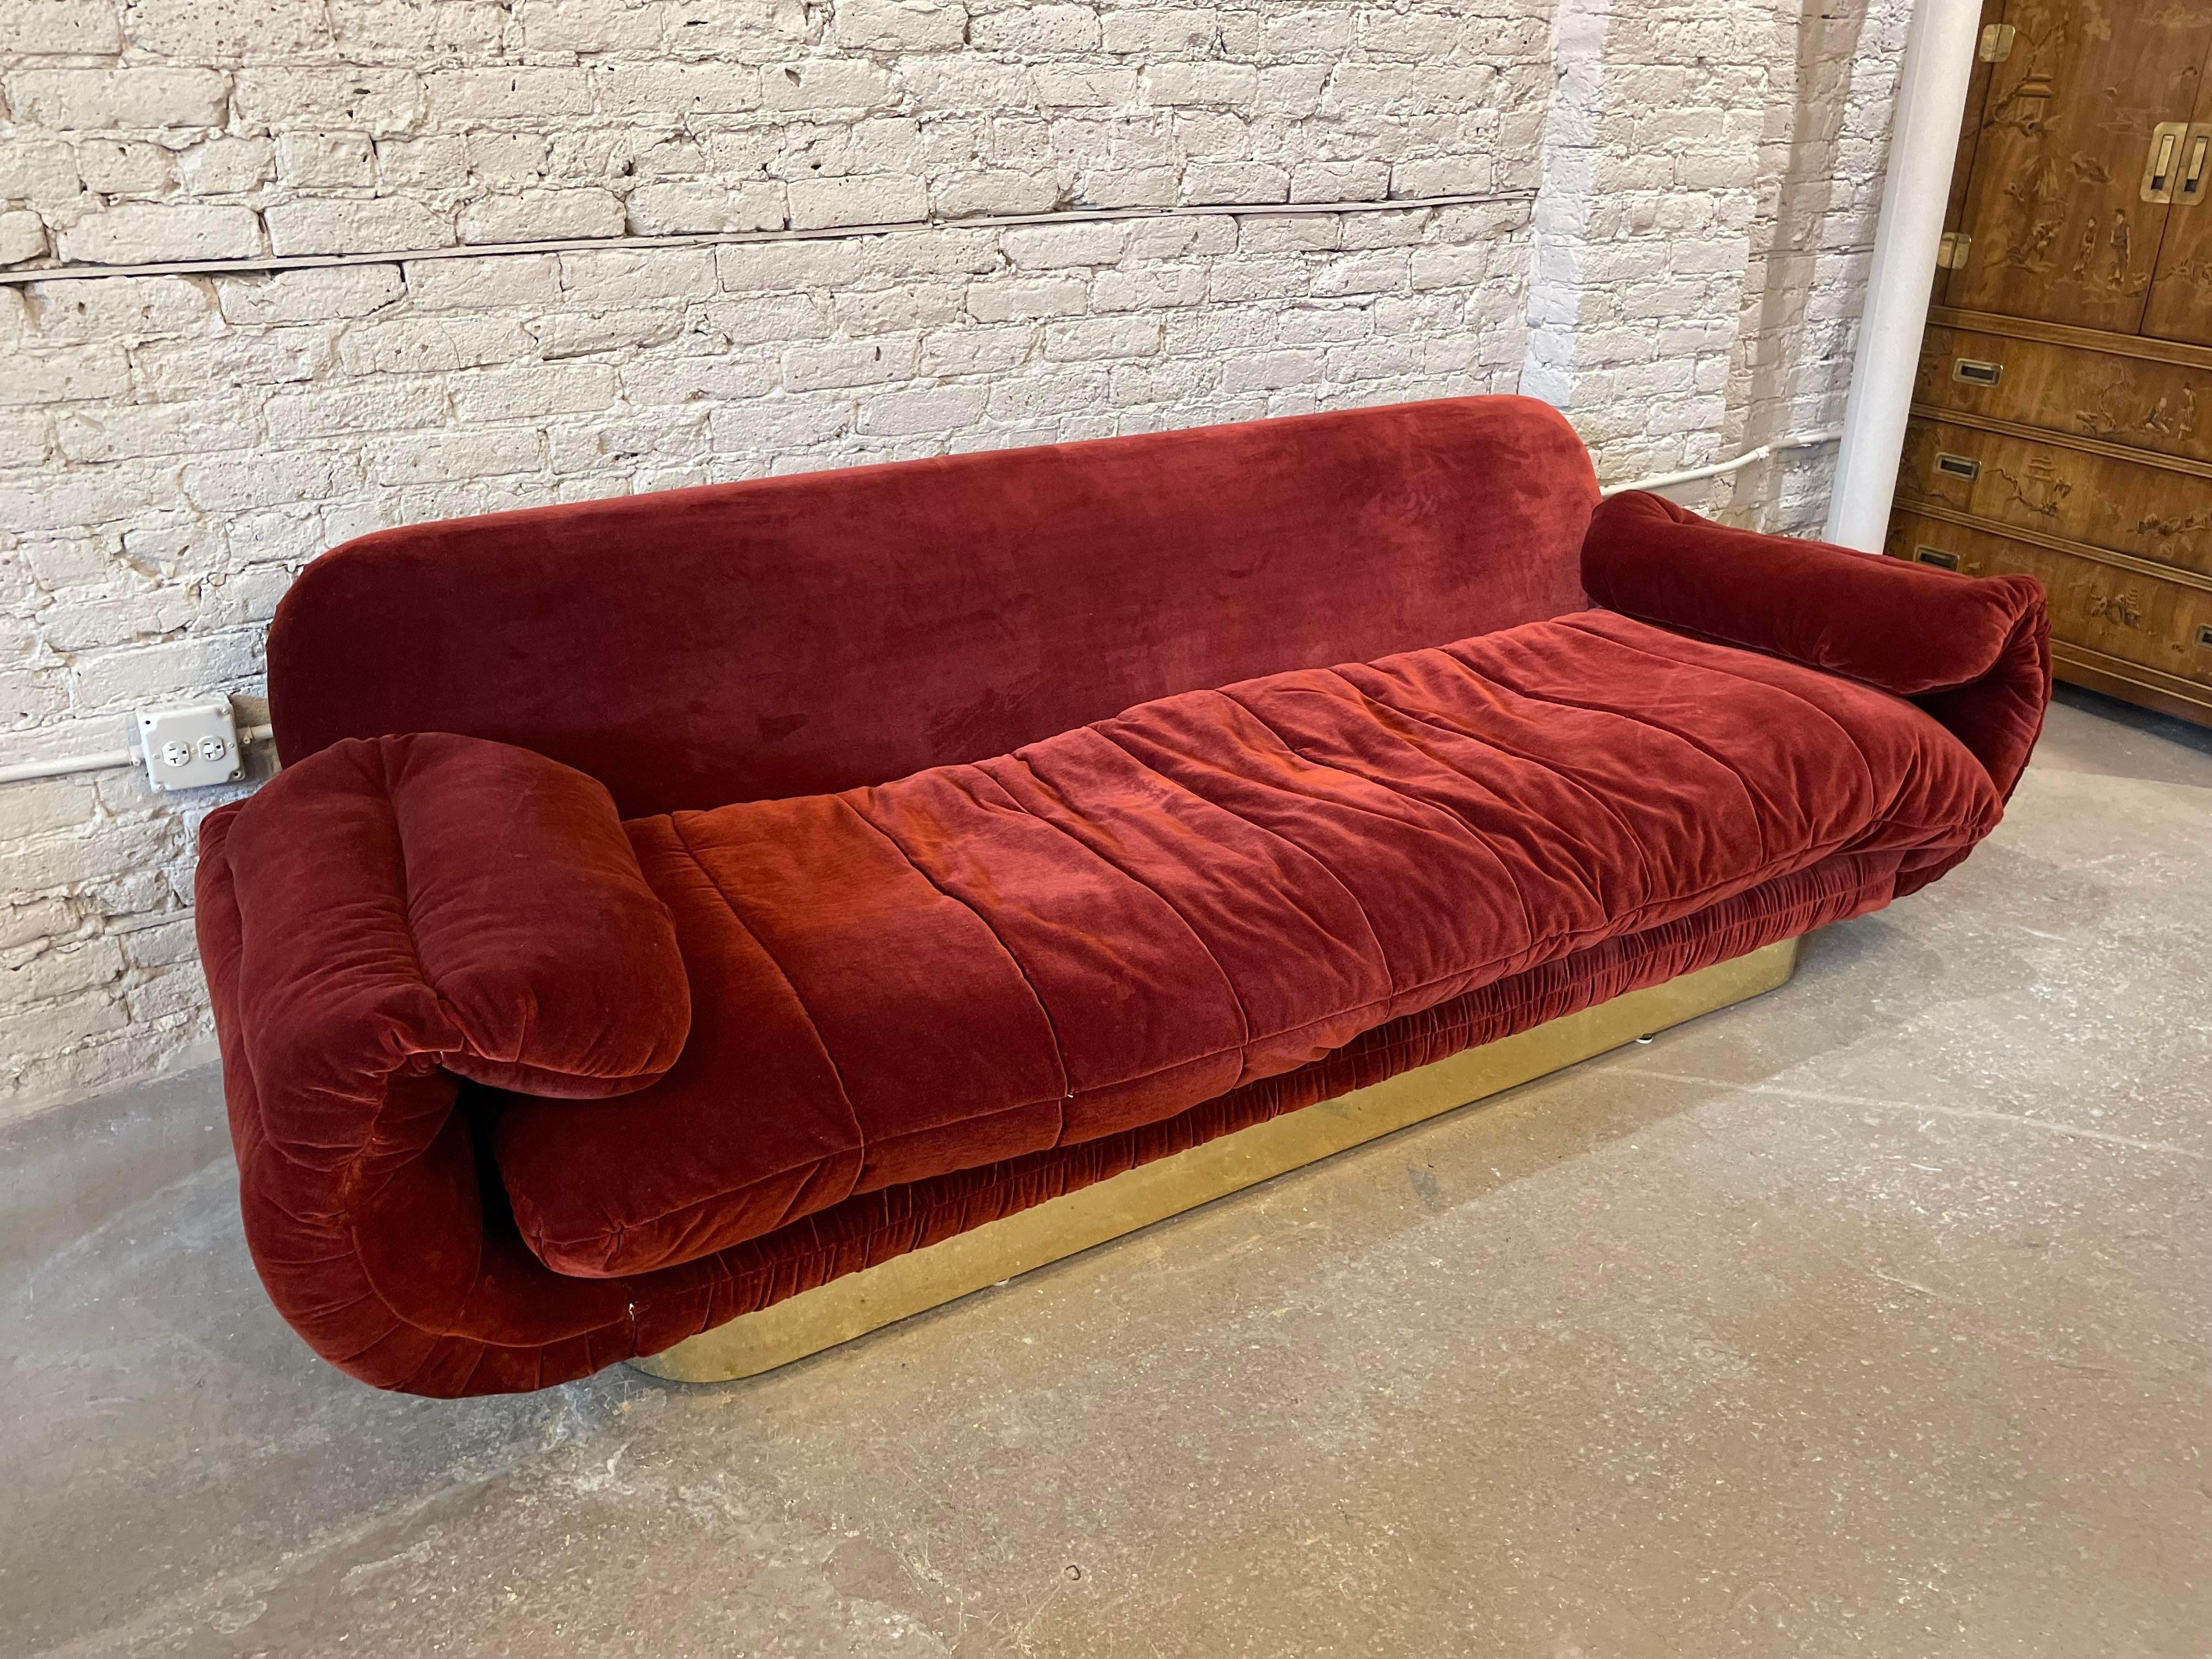 Absolutely breathtaking. Original condition in excellent condition. I also have a matching loveseat and smaller loveseat (56” and 66” wide). Check out my other listings.
